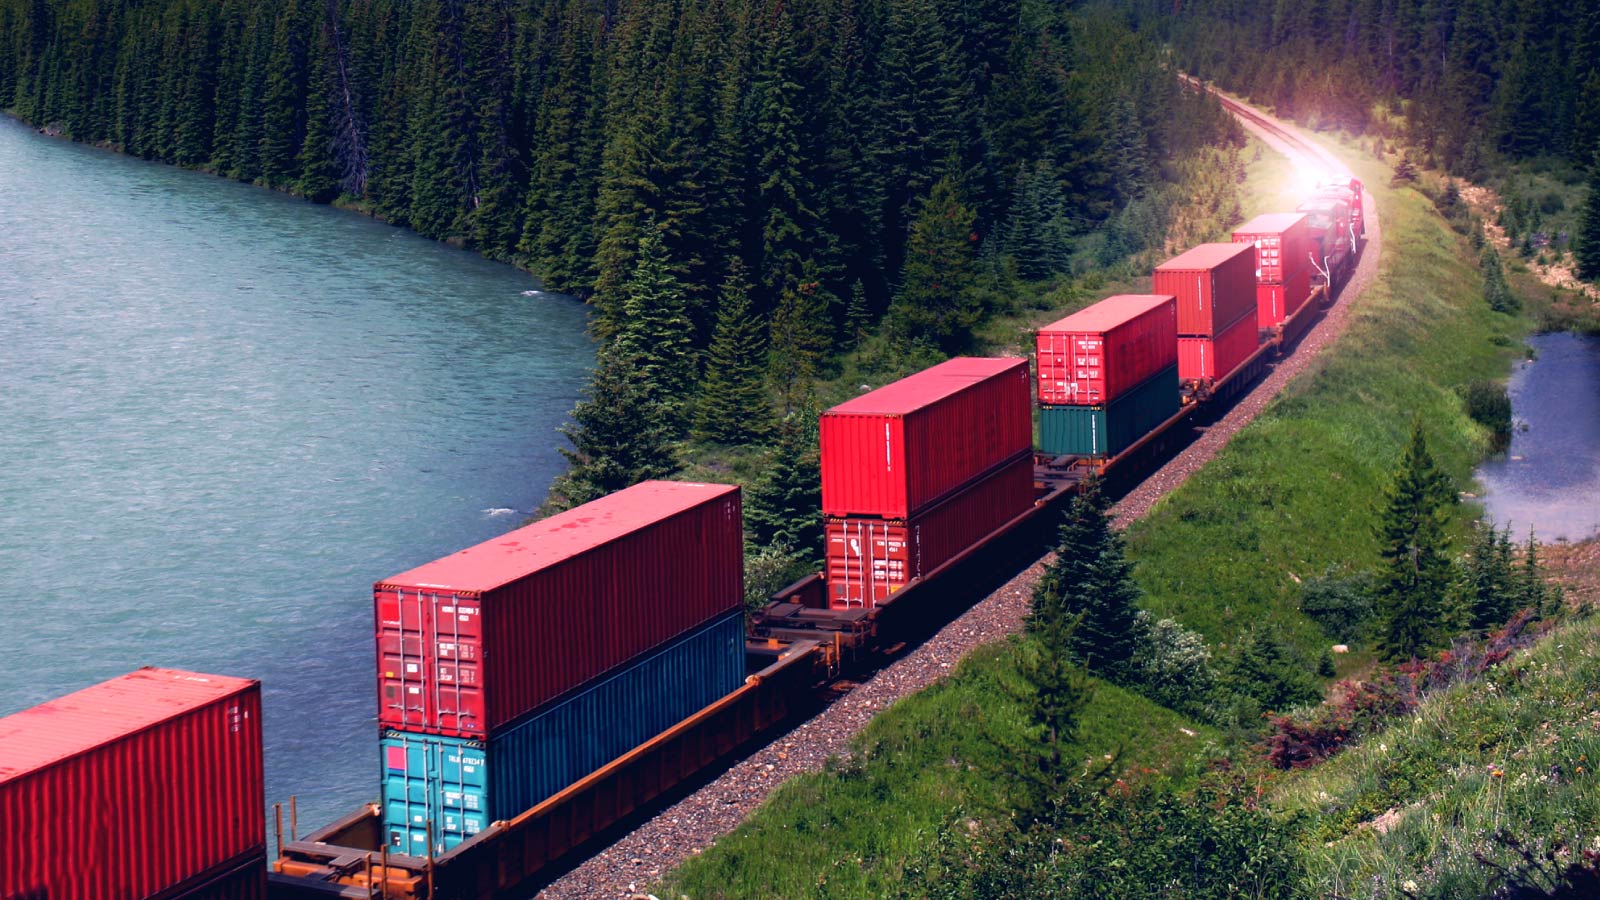 Shipping containers on a train in a mountain pass